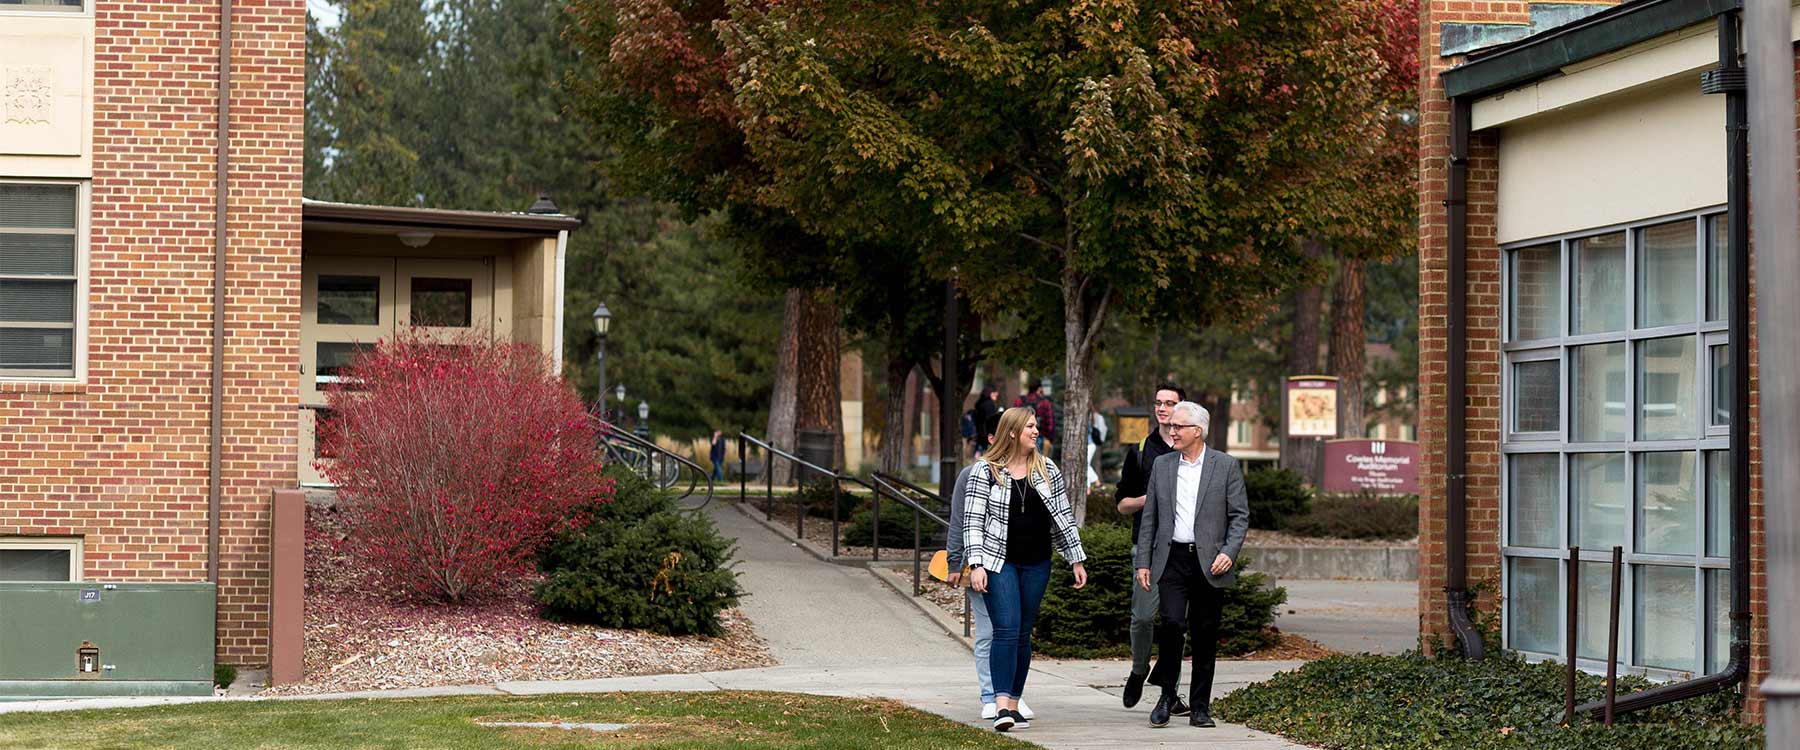 Professor Randall Michaelis walks with a small group of students on a path through campus.